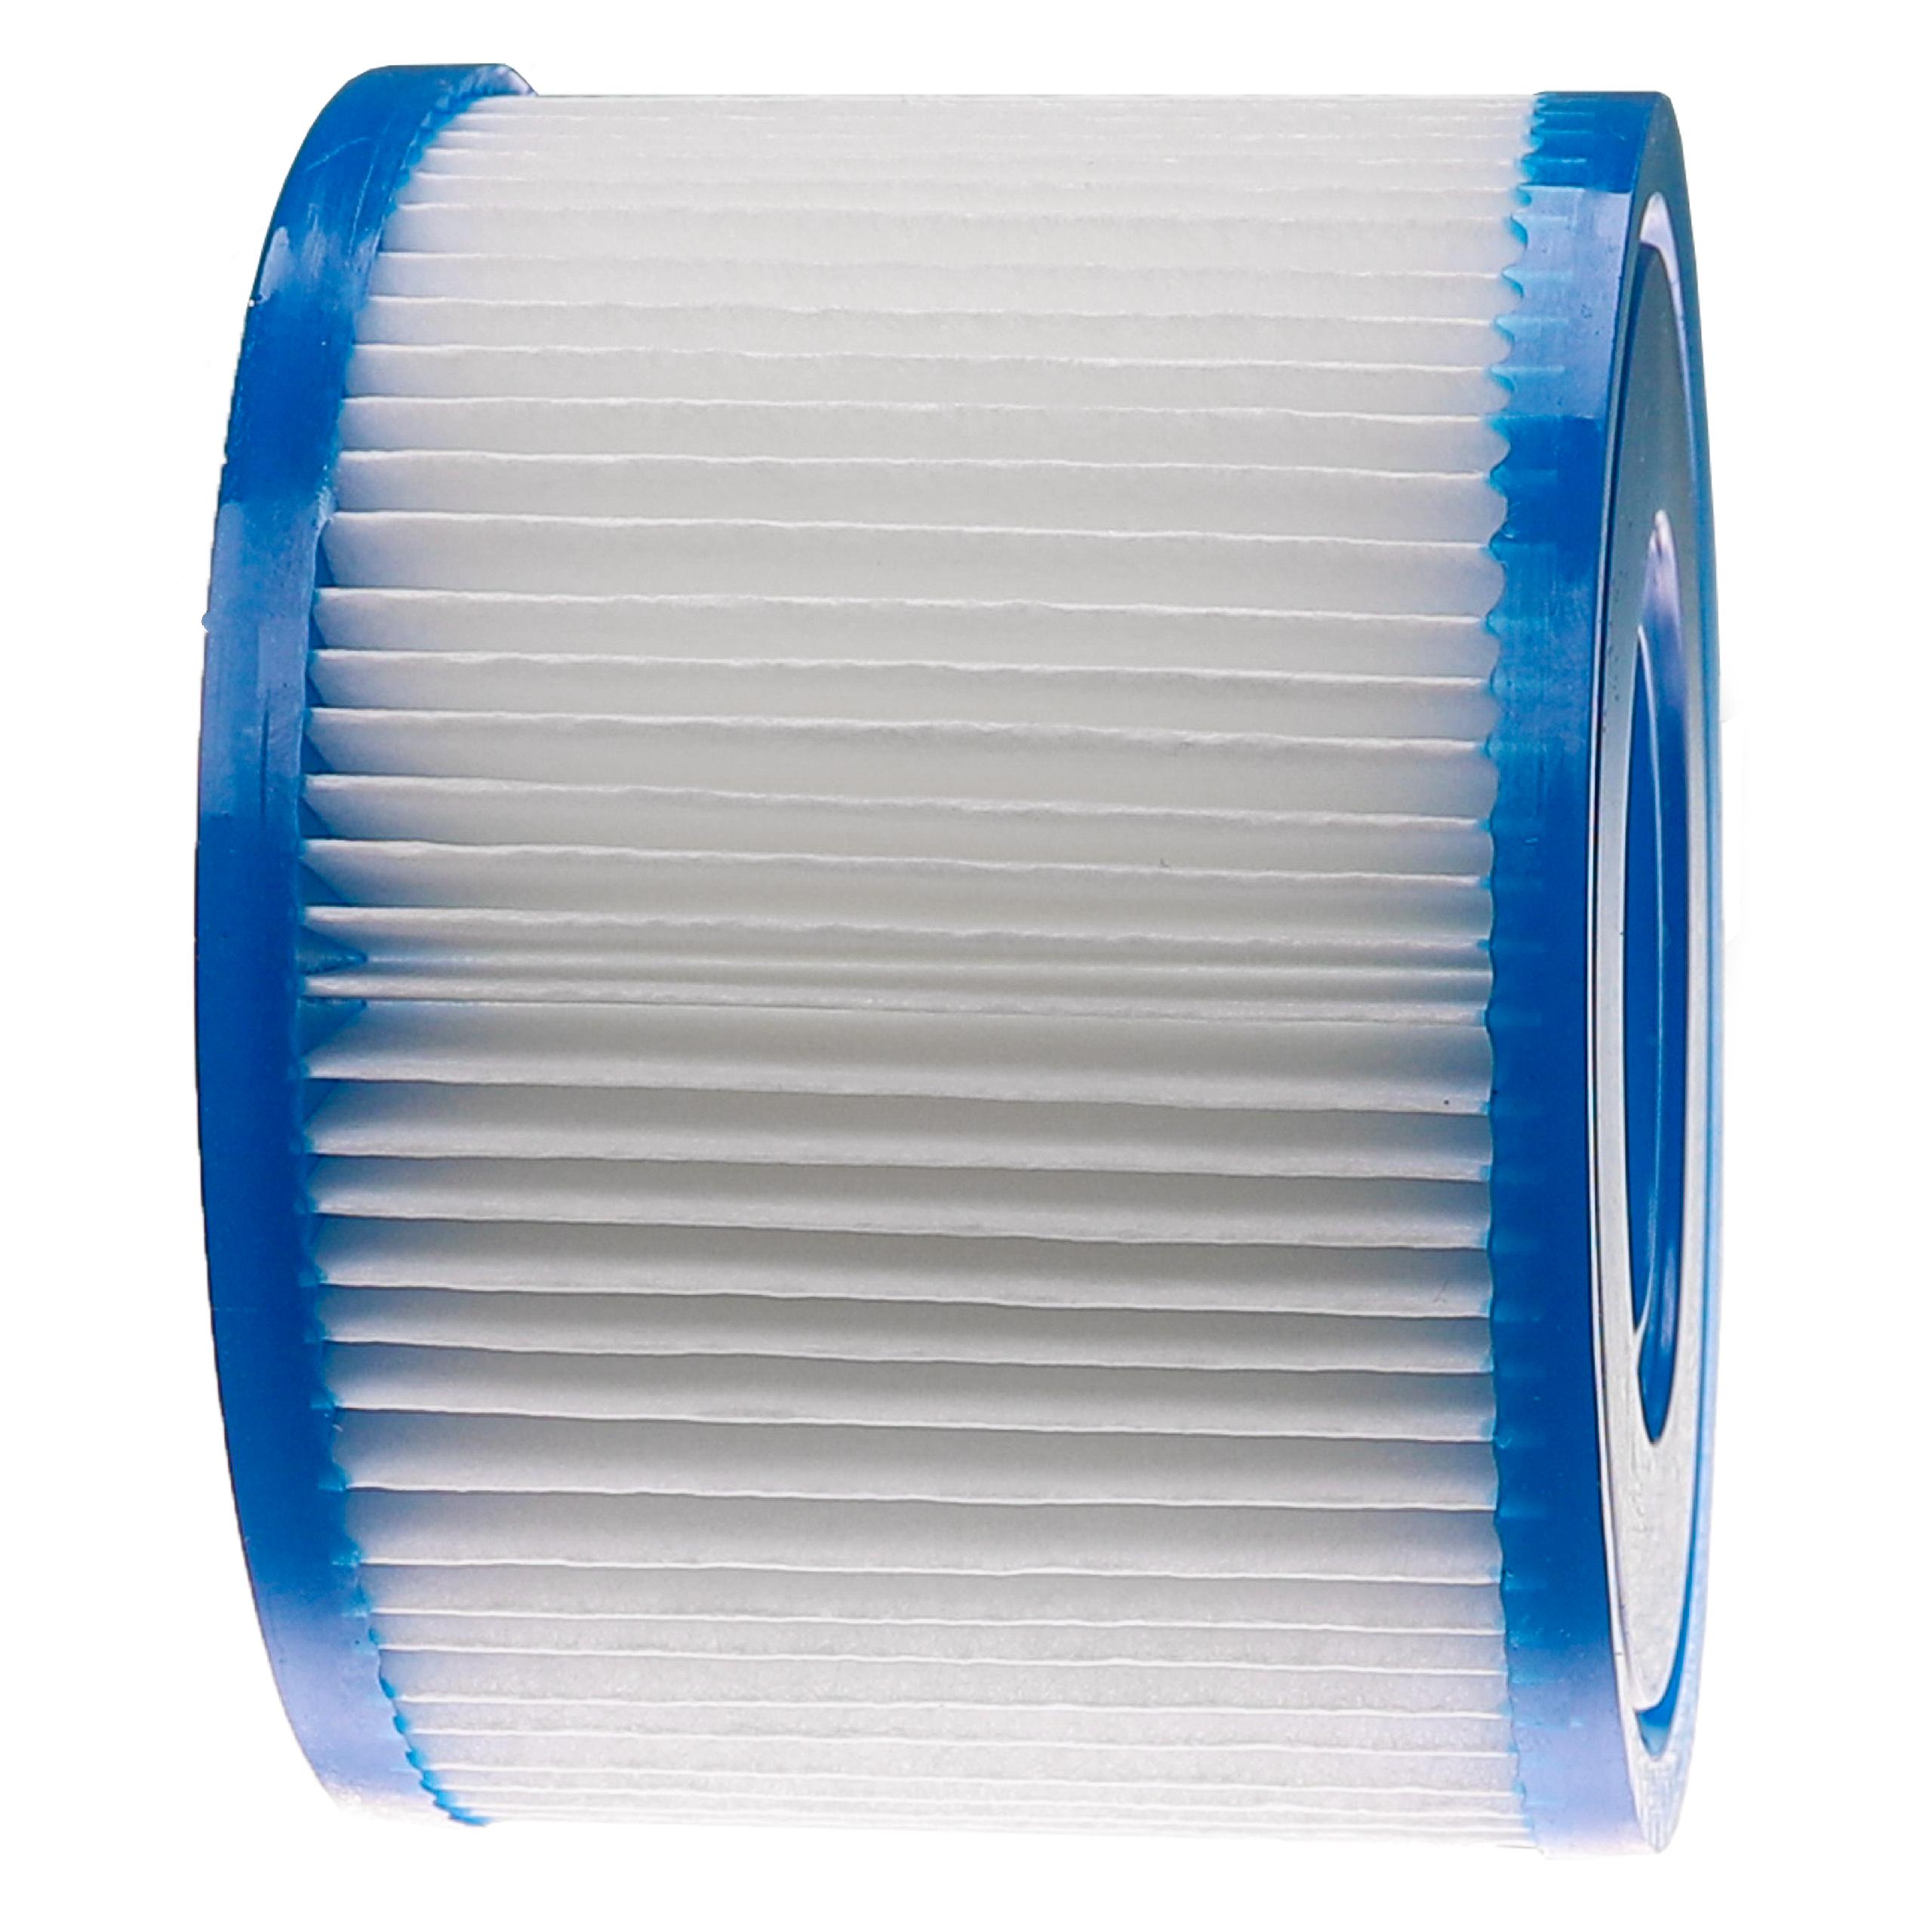 2x Pool Filter Type S1 as Replacement for Bestway FD2135 - Filter Cartridge